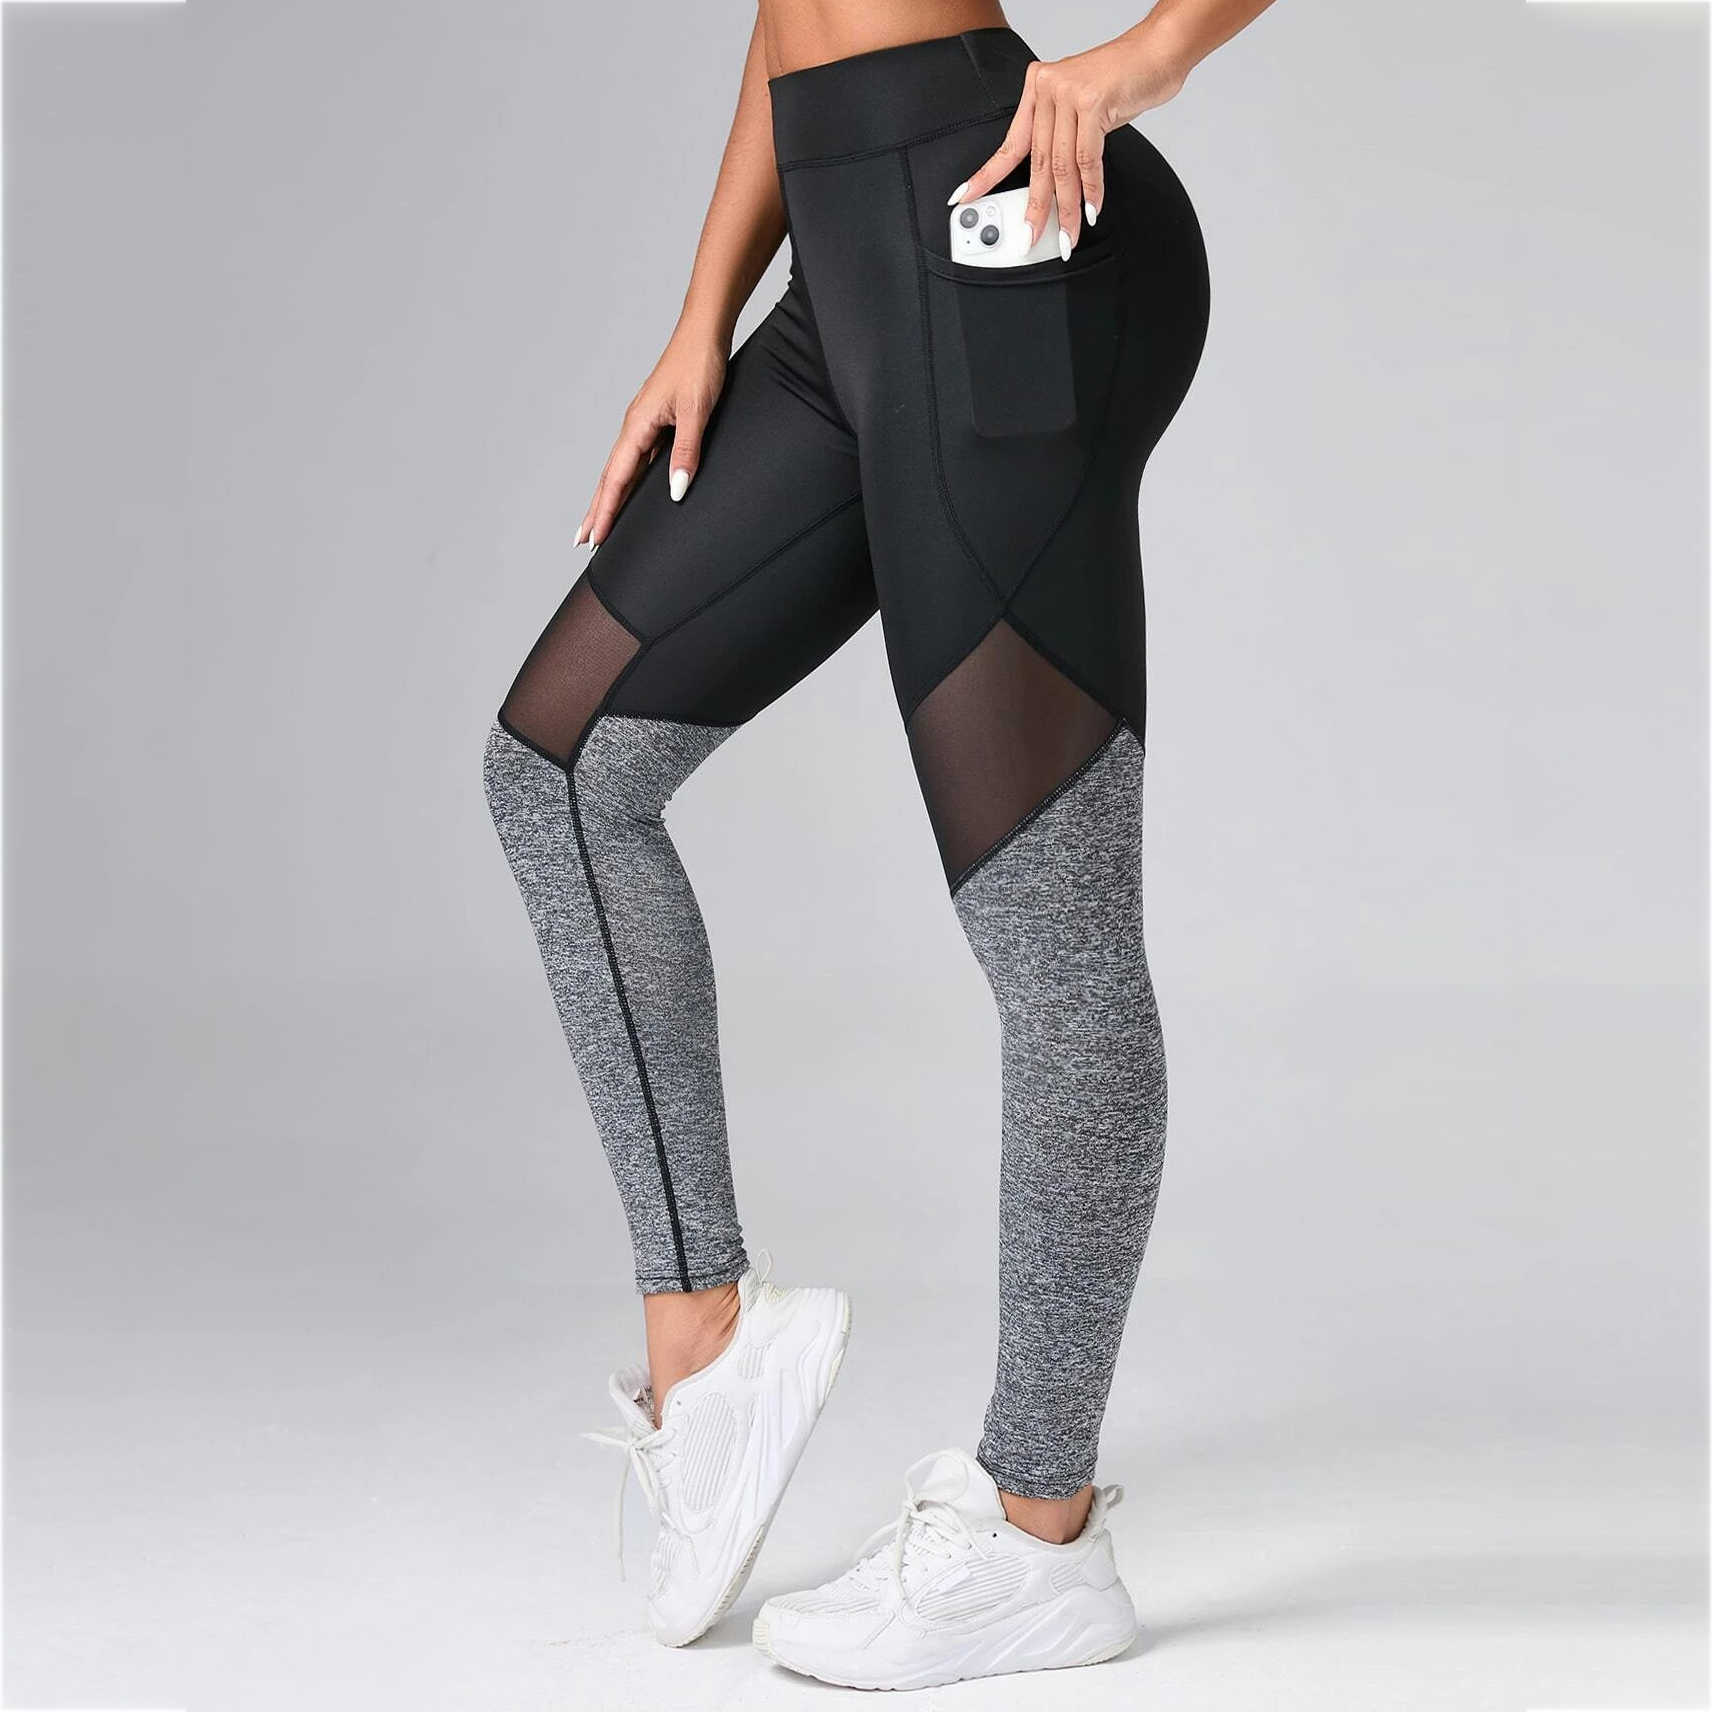 Contrast Color Panel Yoga Leggings Mesh Insert Gym Tights With Phone Pocket - M